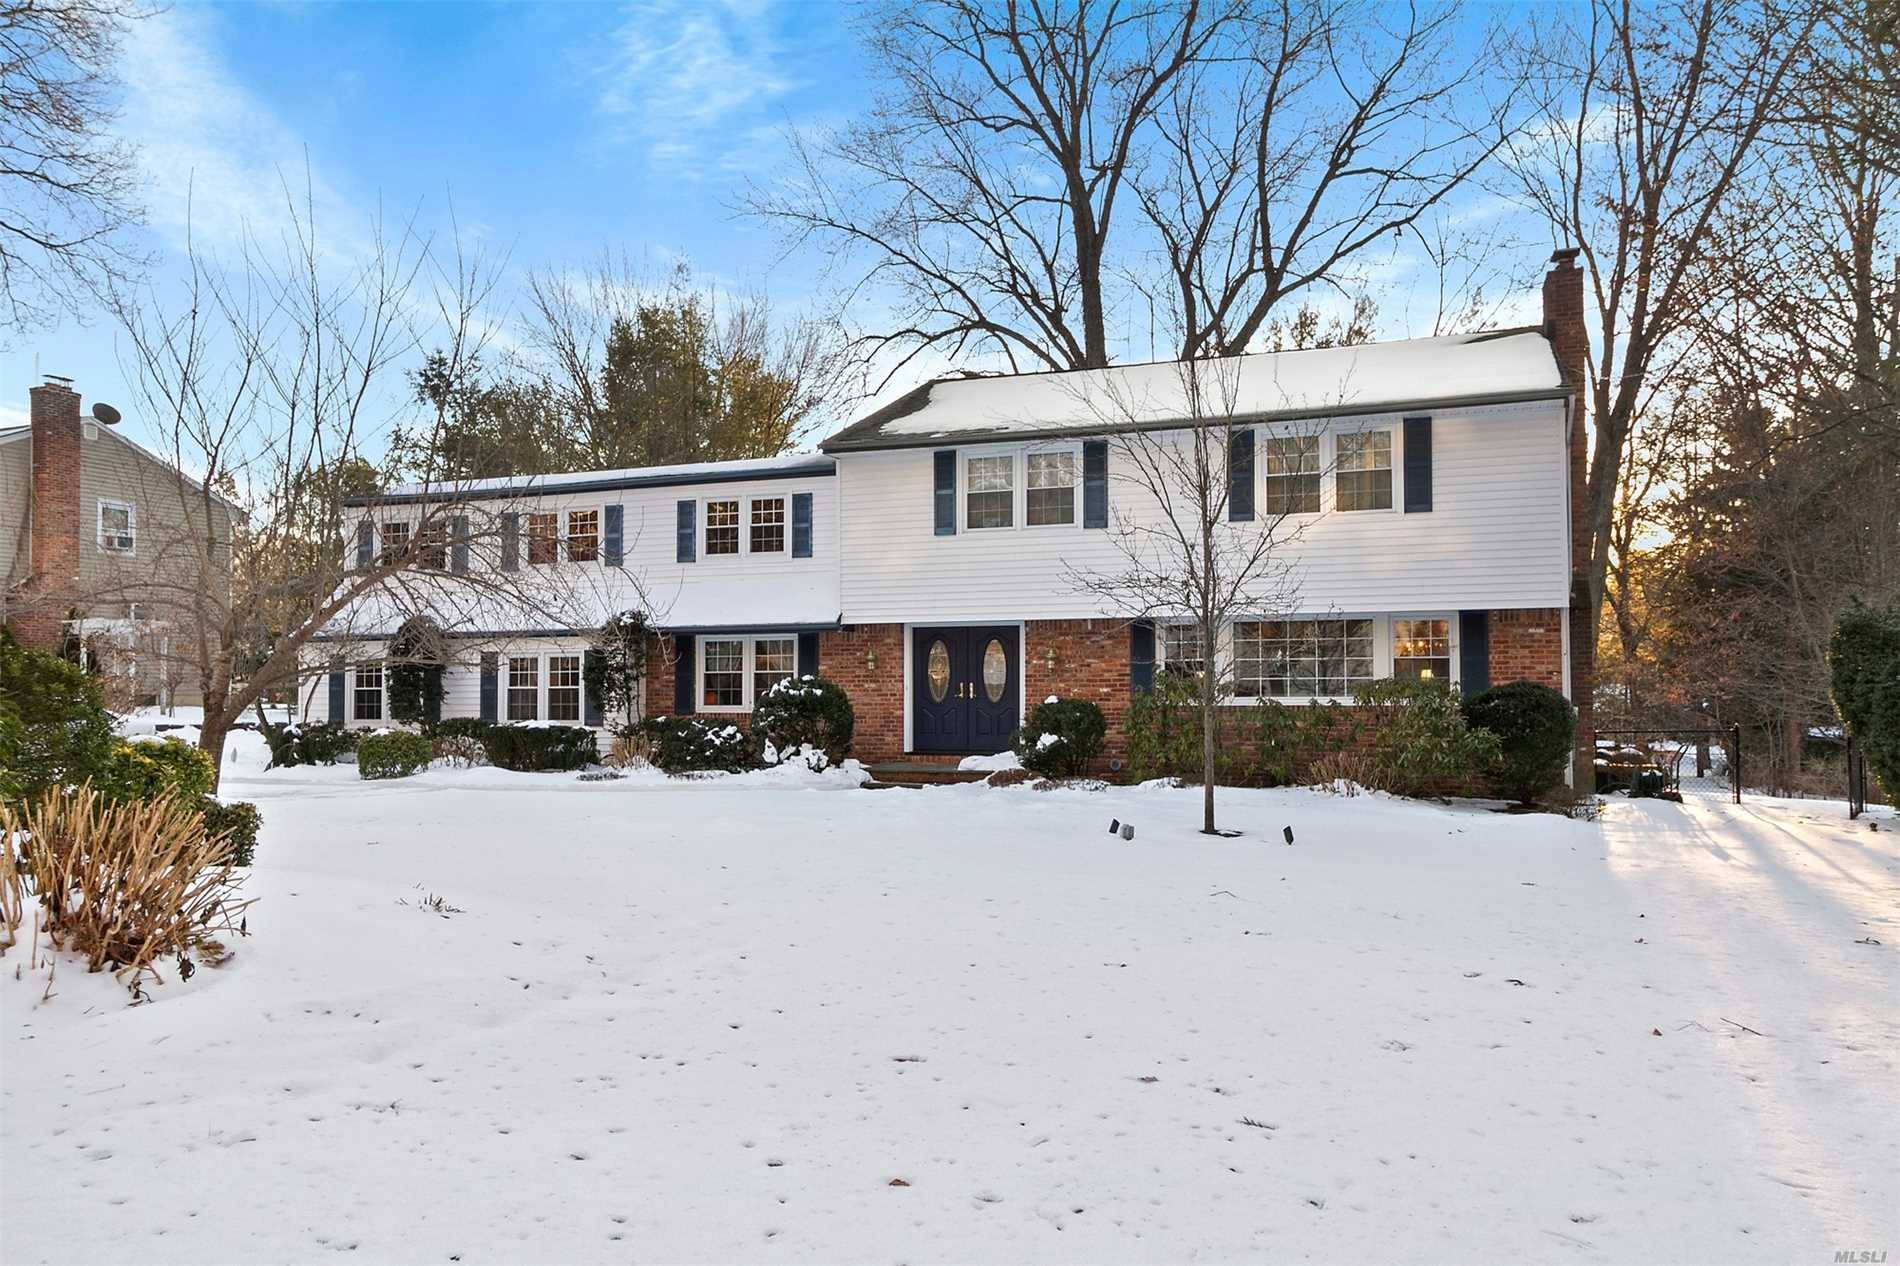 Expanded Six Bedroom Colonial In Desired Cold Spring Harbor Schools With Detached 2 Car Garage.